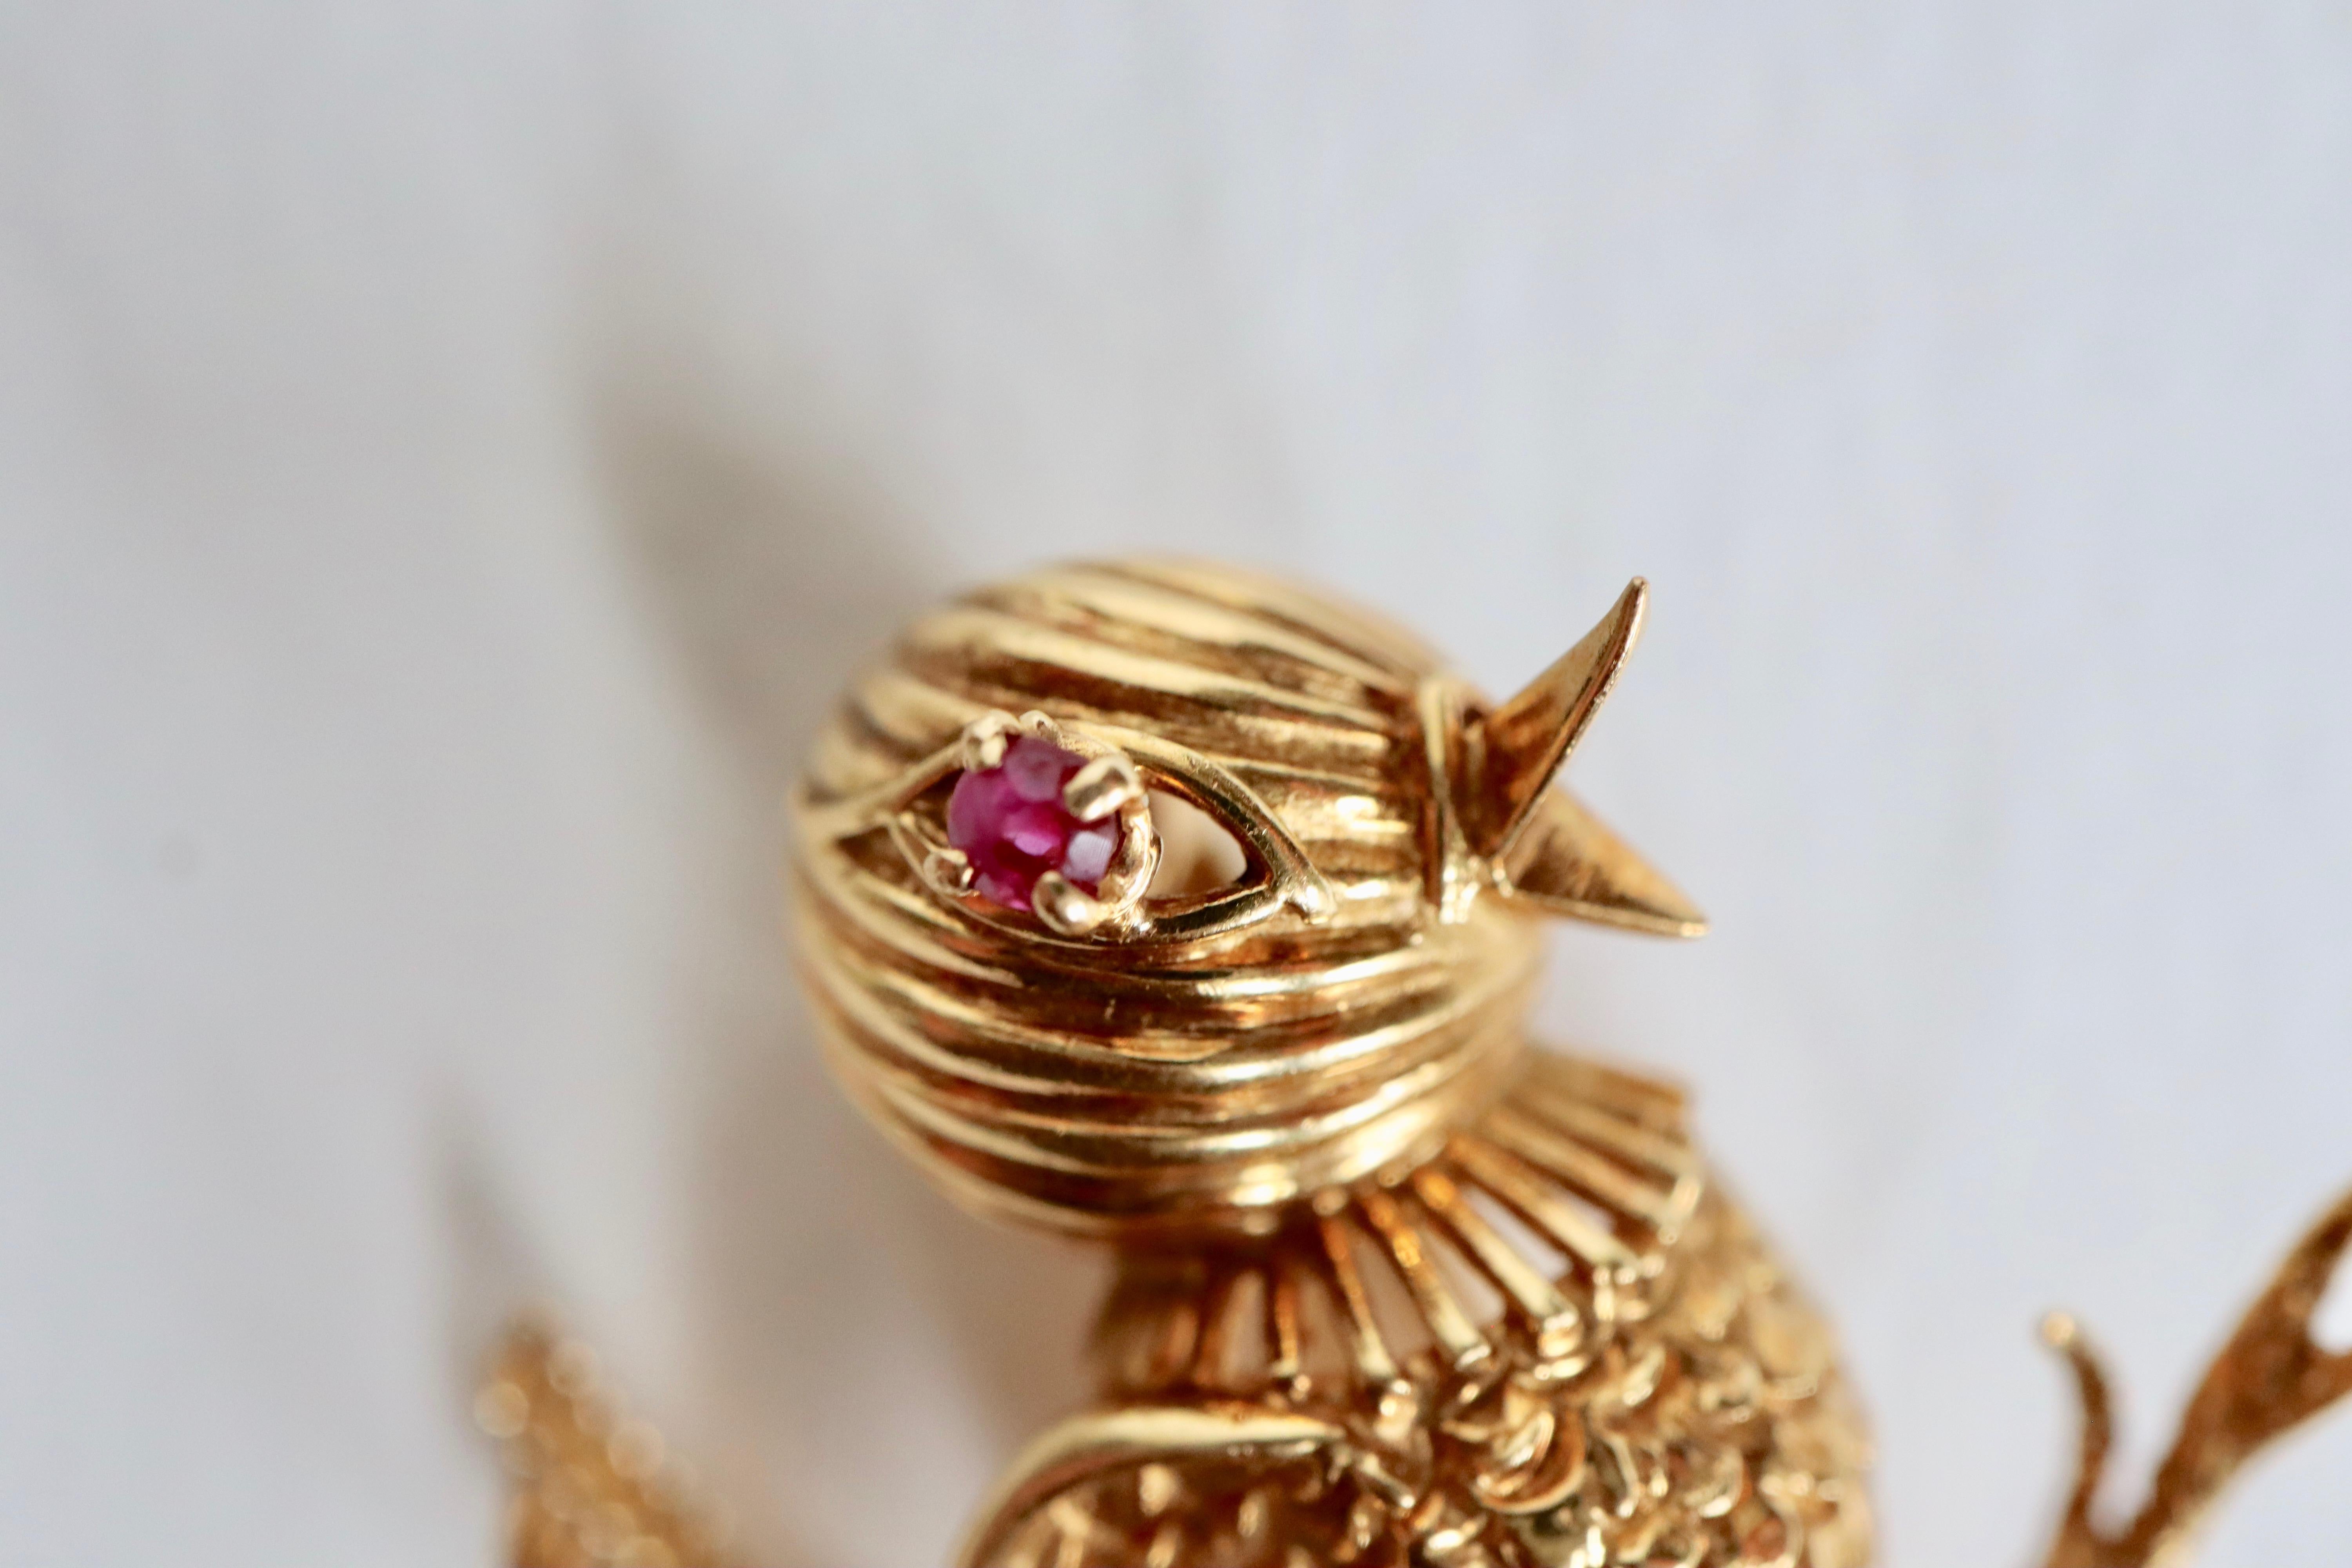 MELLERIO Bird Brooch in 18 carat yellow Gold, the Eye setting a Ruby circa 1960.
Small bird in profile on a branch, the body finely chiseled in imitation of the plumage, the twisted gold tail, the gadrooned head, the eye is set with a claw-set